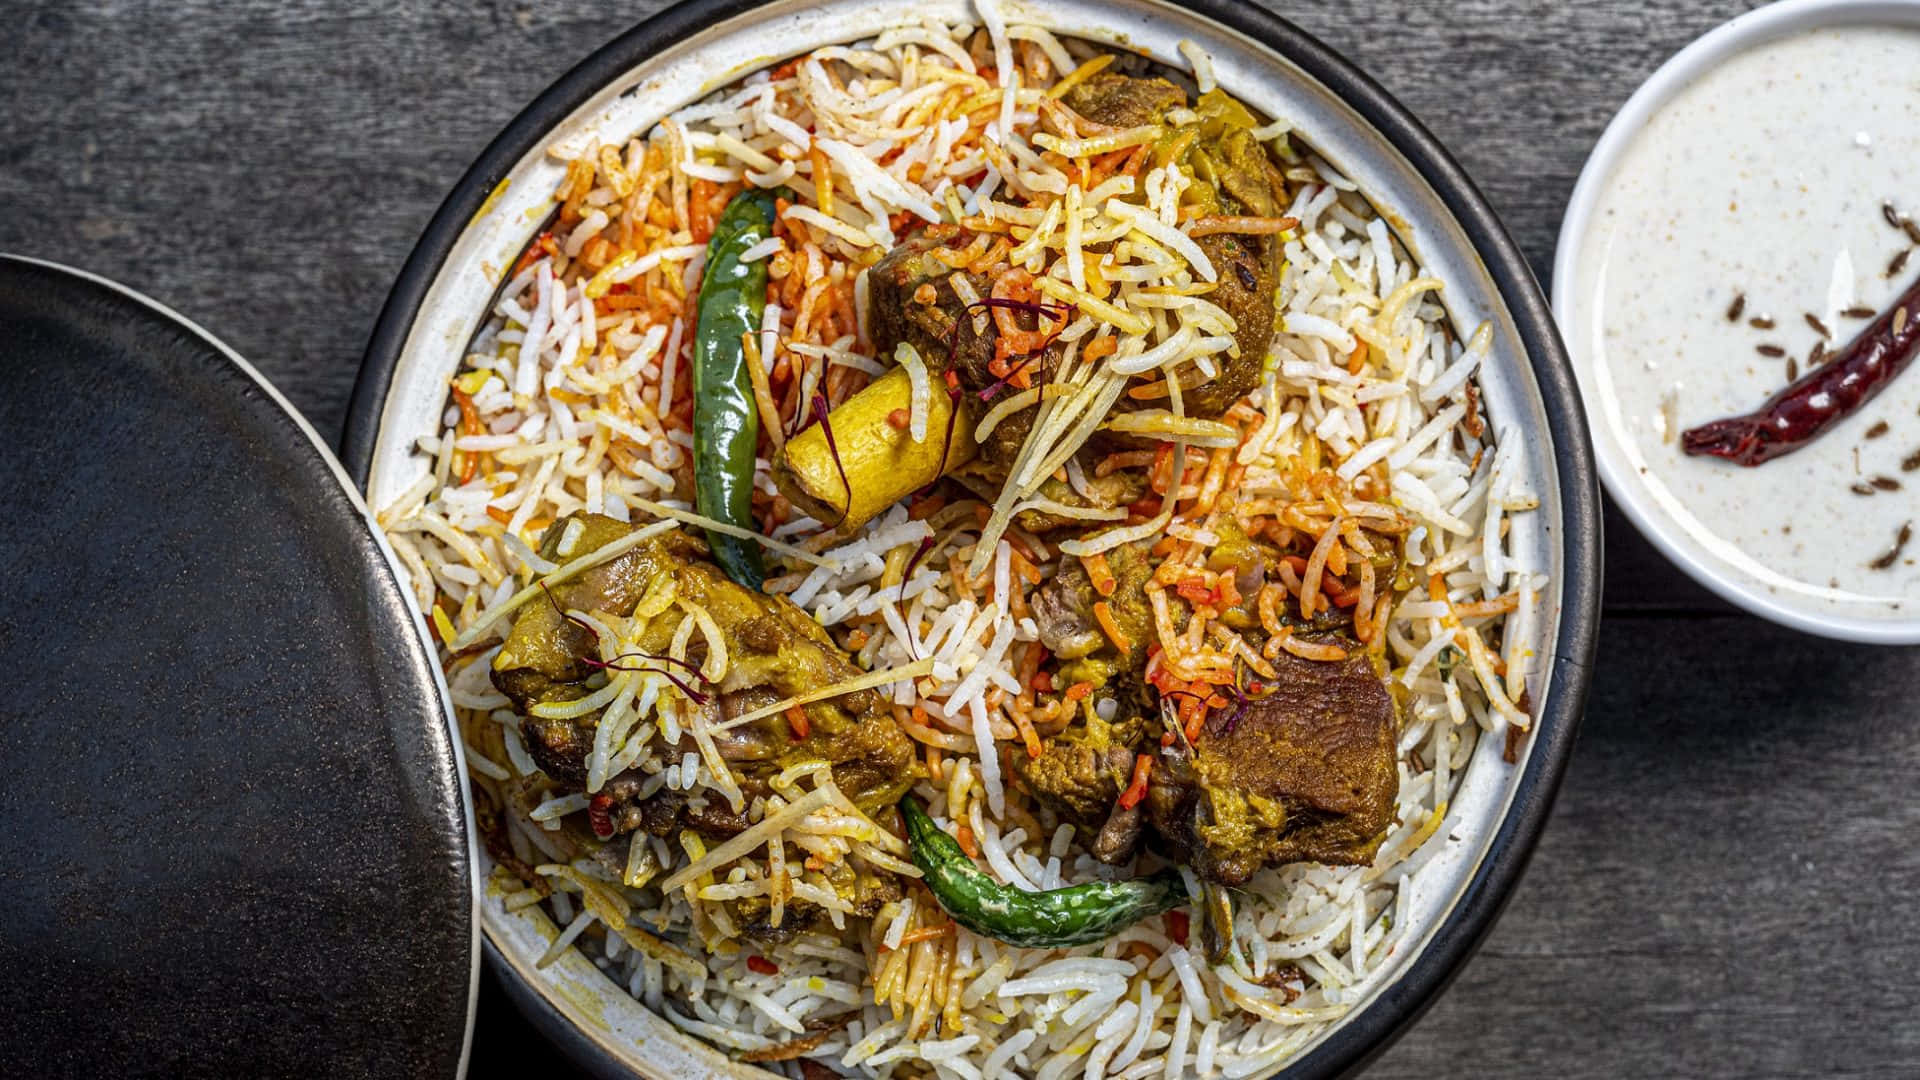 Delicious and Aromatic Plate of Biryani